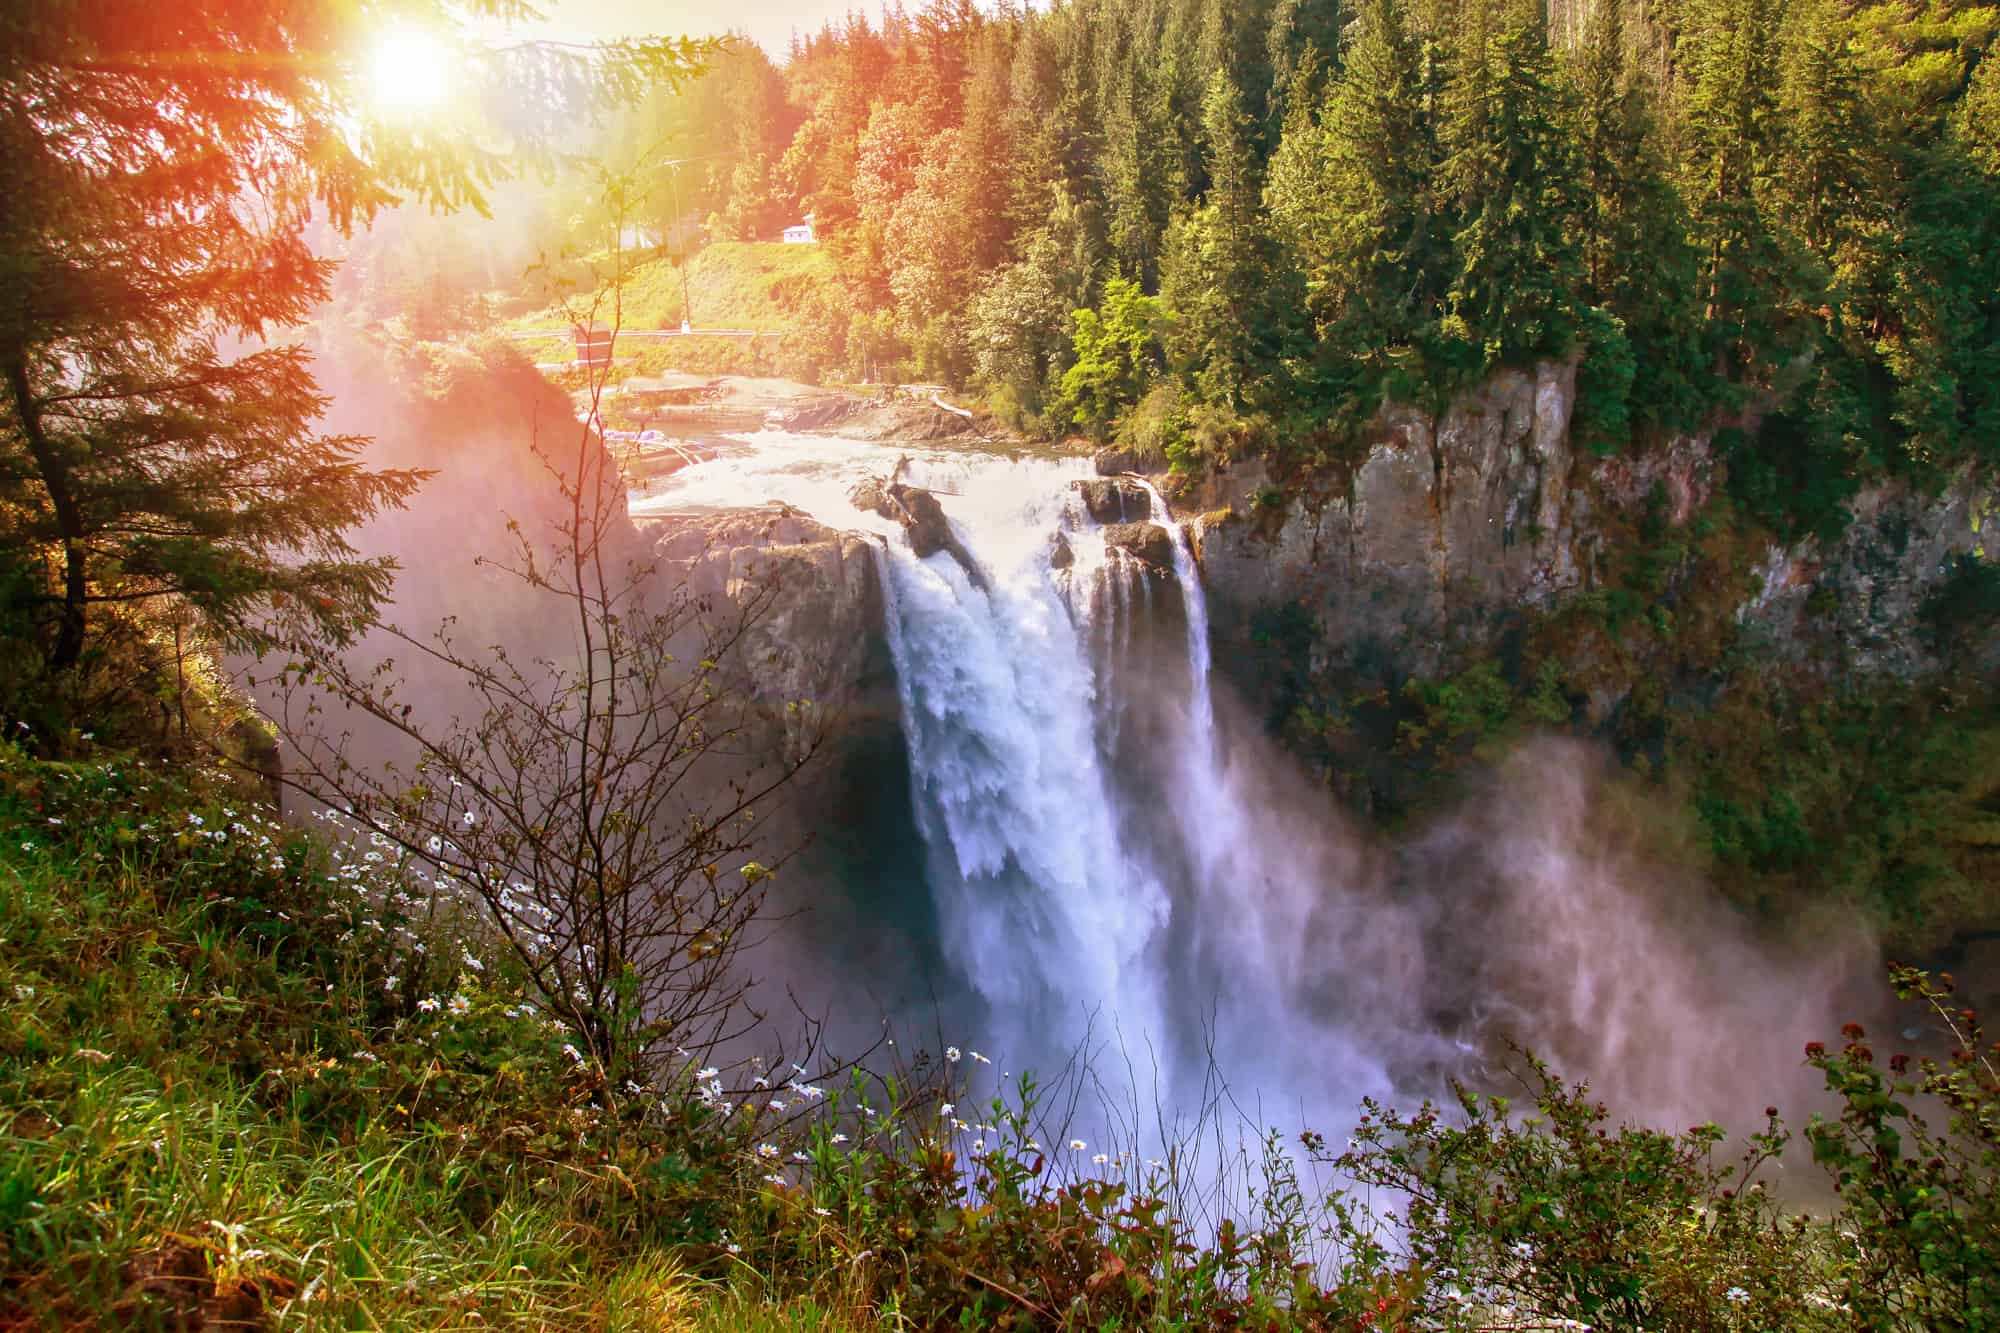 snoqualmie falls at sunset with sun shining on the op of the falls as it flows down over the cliff